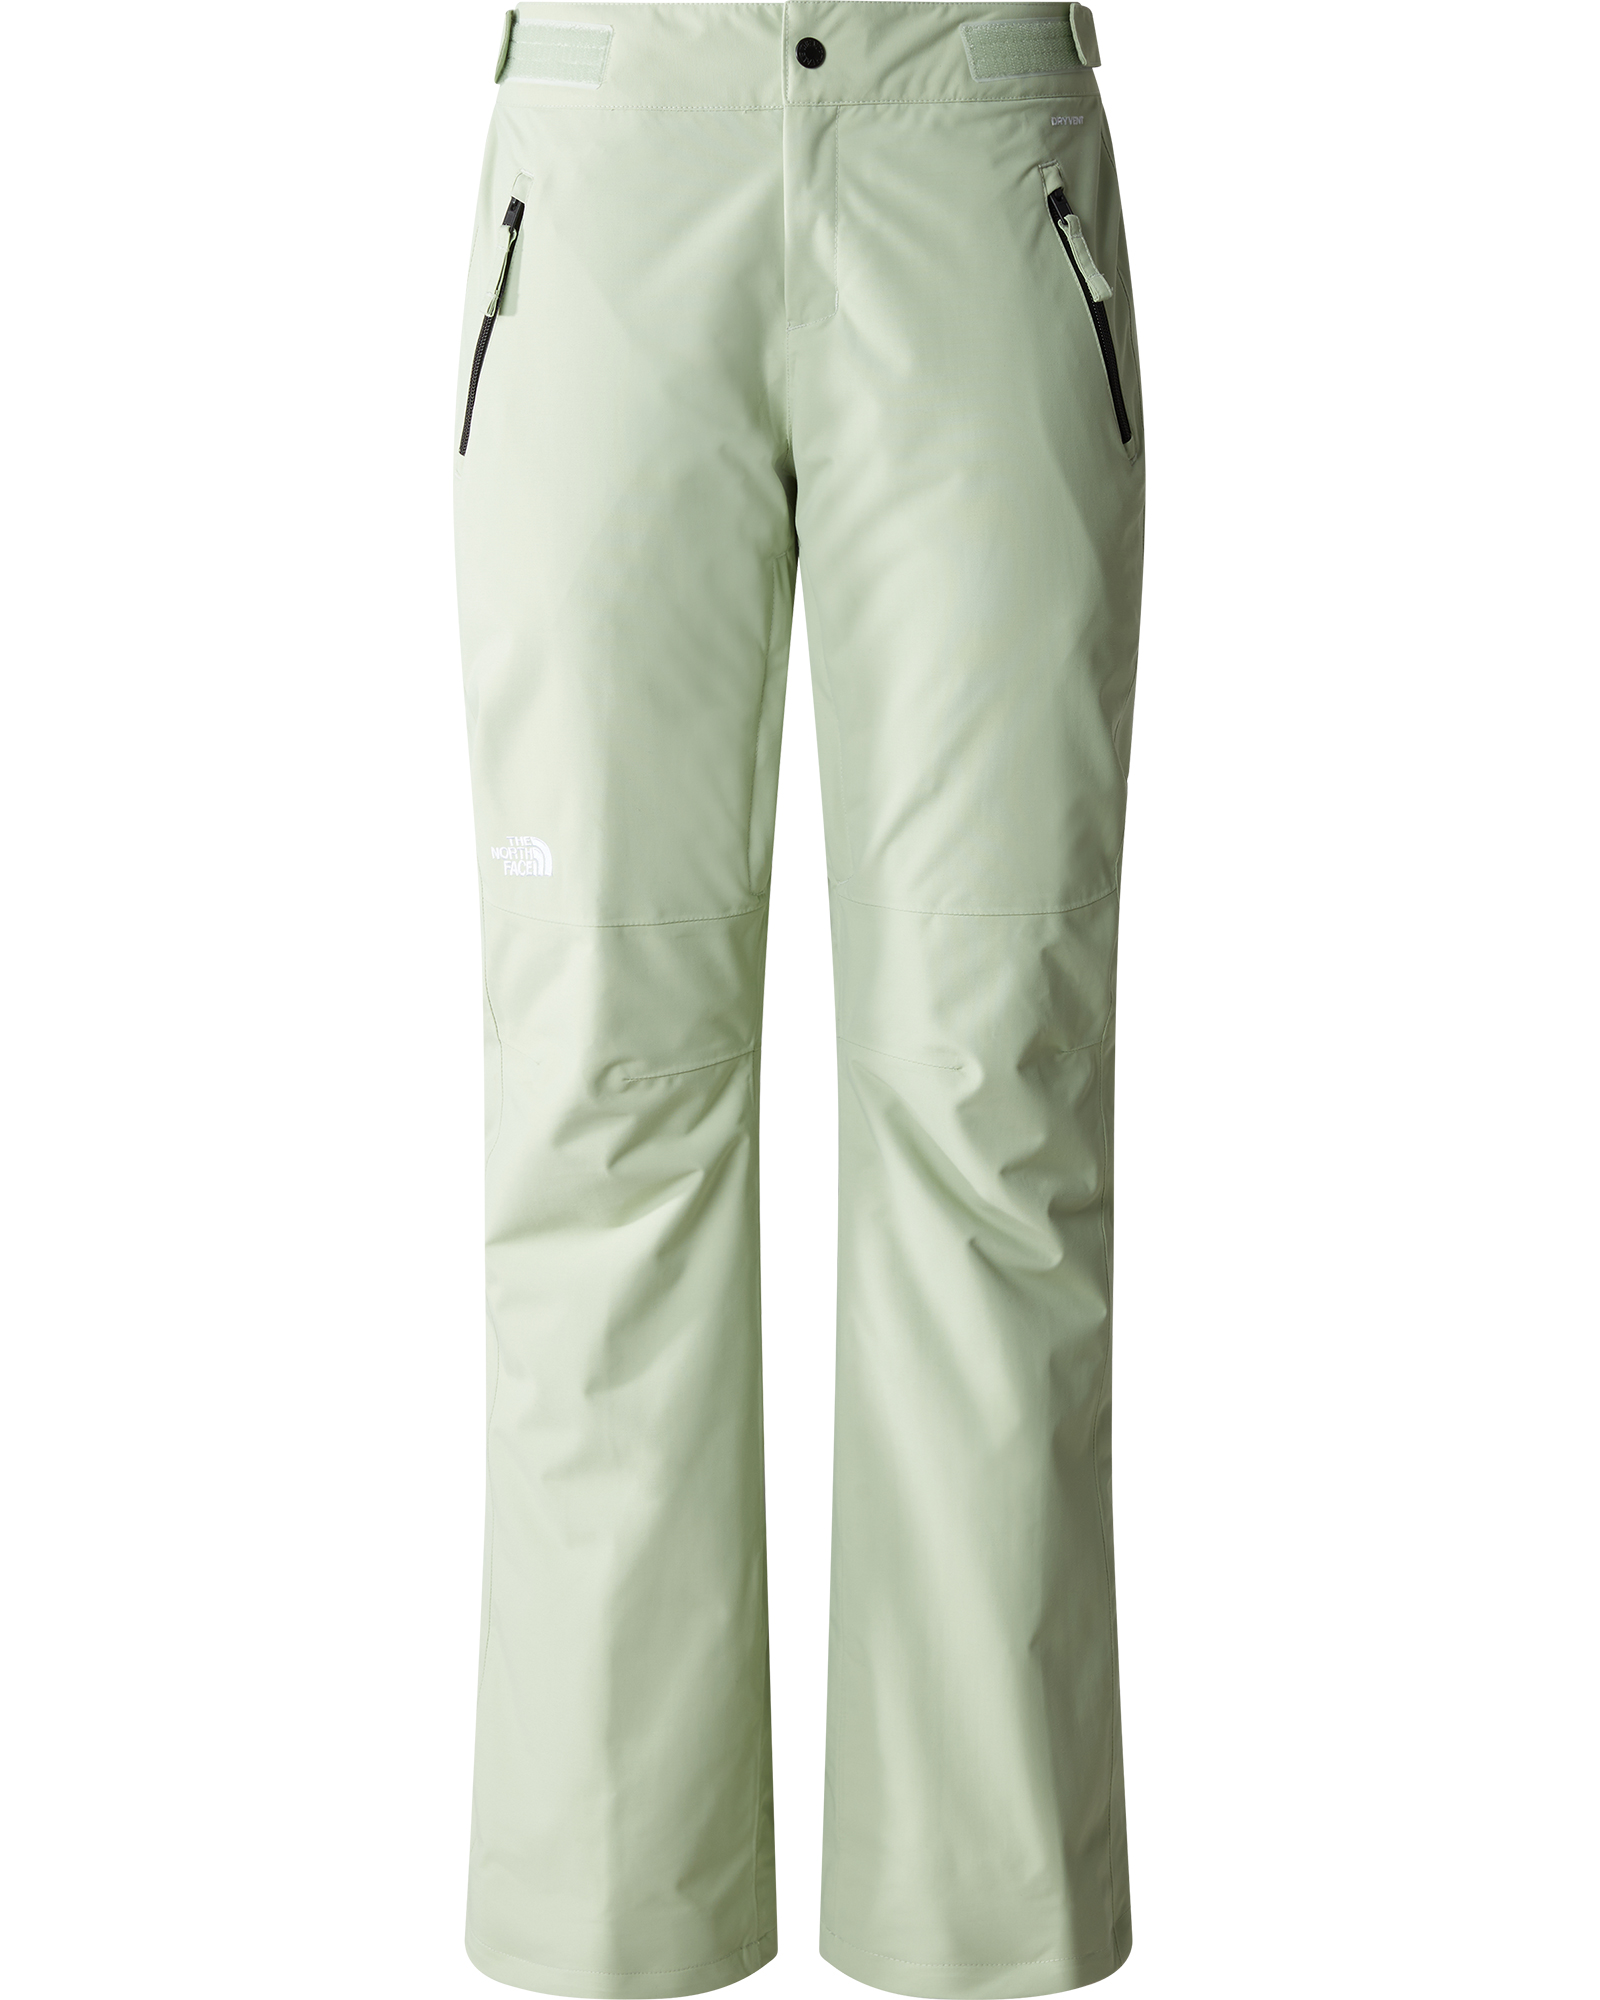 The North Face Aboutaday Women’s Pants - Misty Sage XS